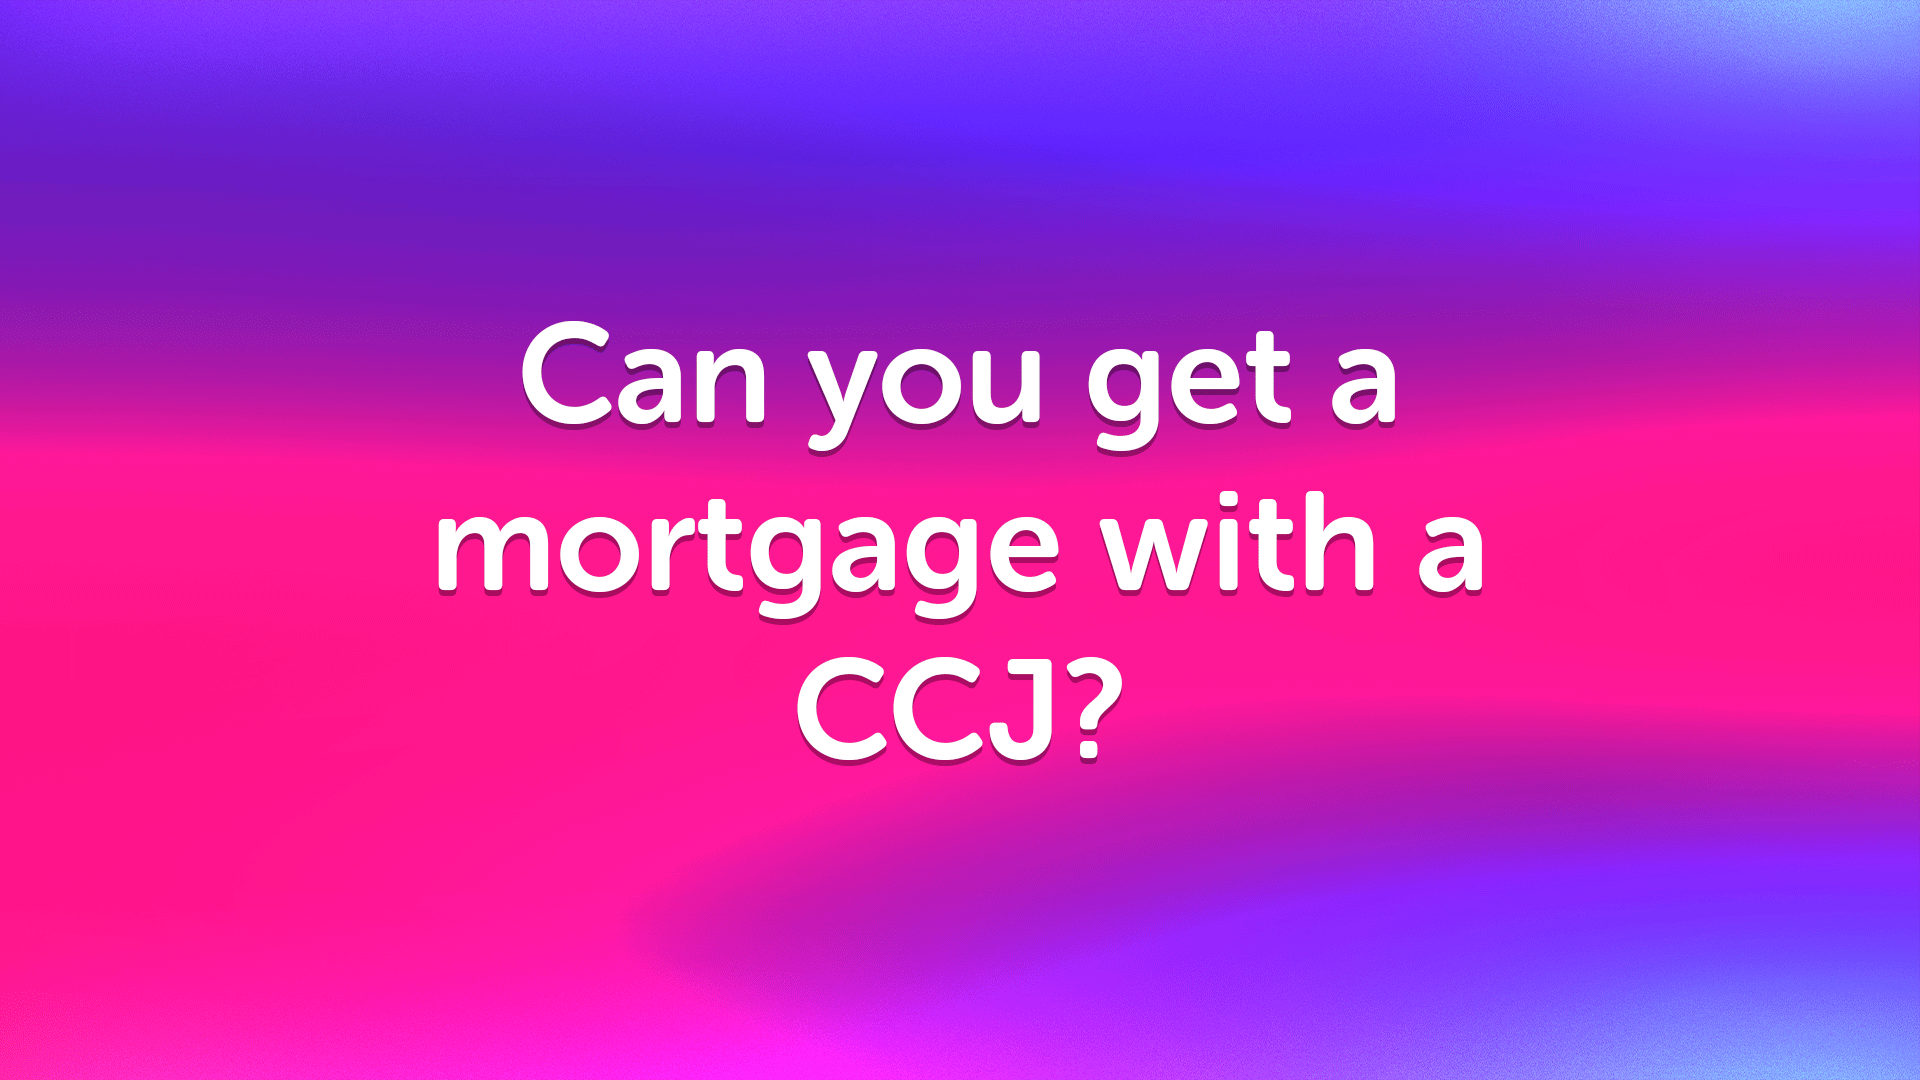 Can you get a mortgage with a CCJ?